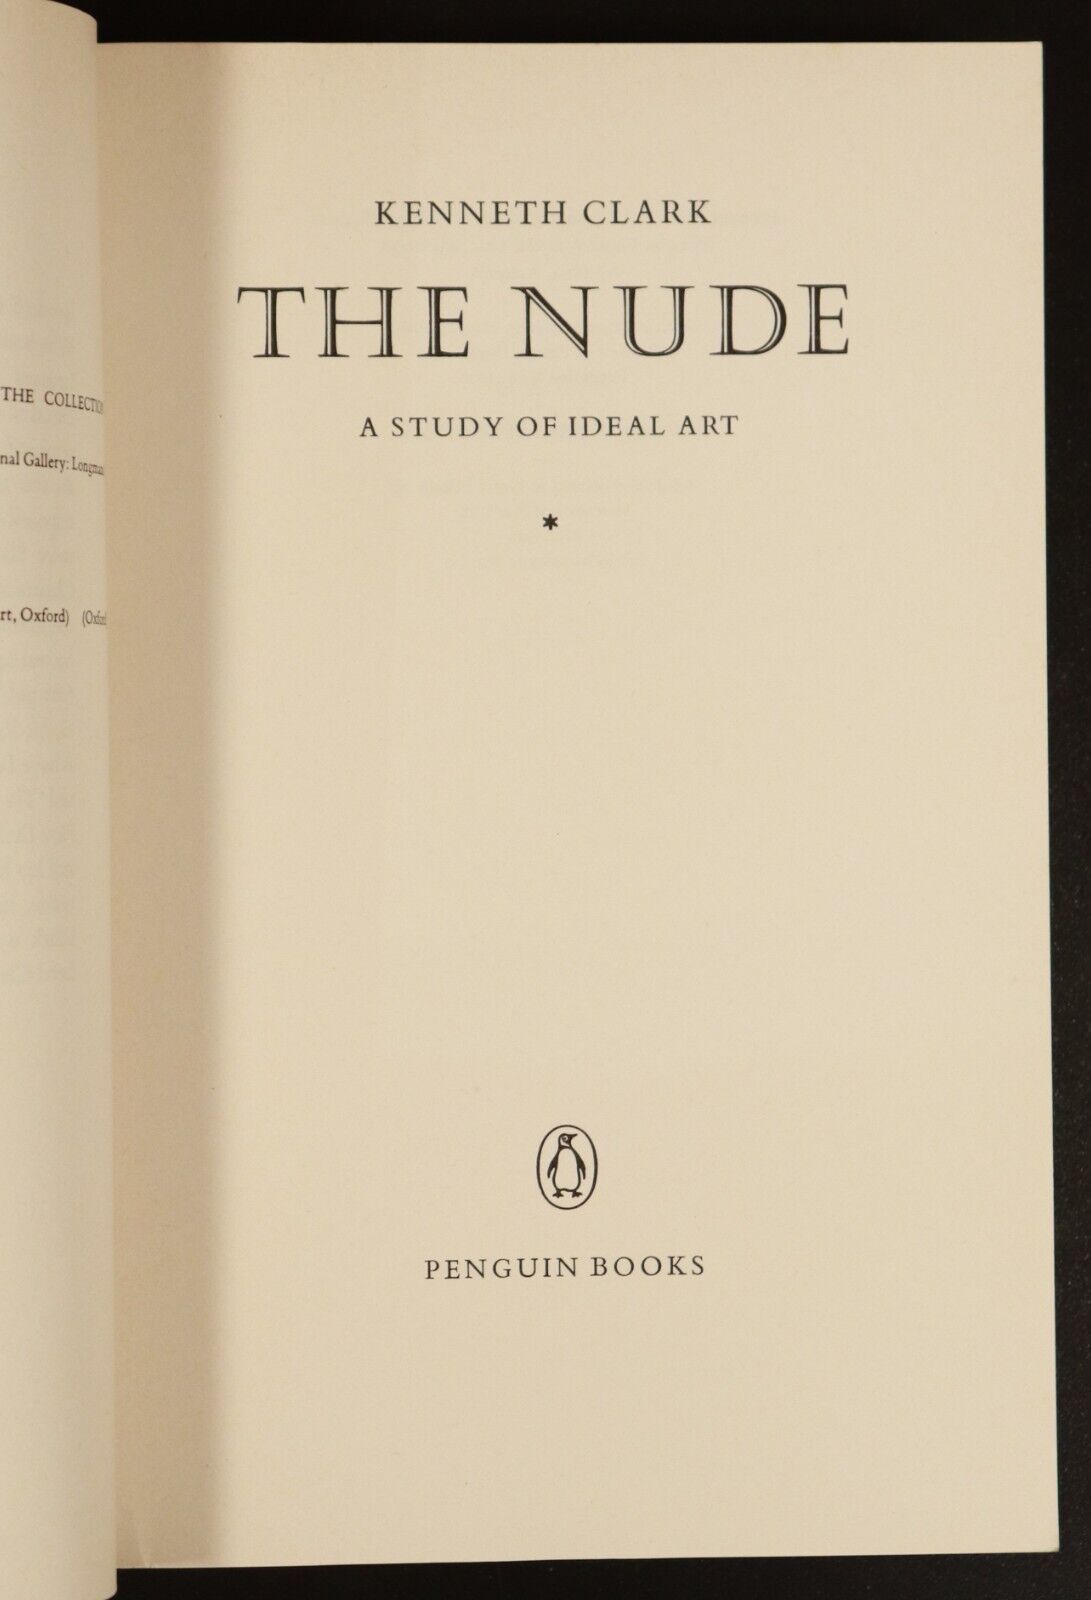 1970 The Nude by Kenneth Clark - A Study Of Ideal Art - Vintage Art Book